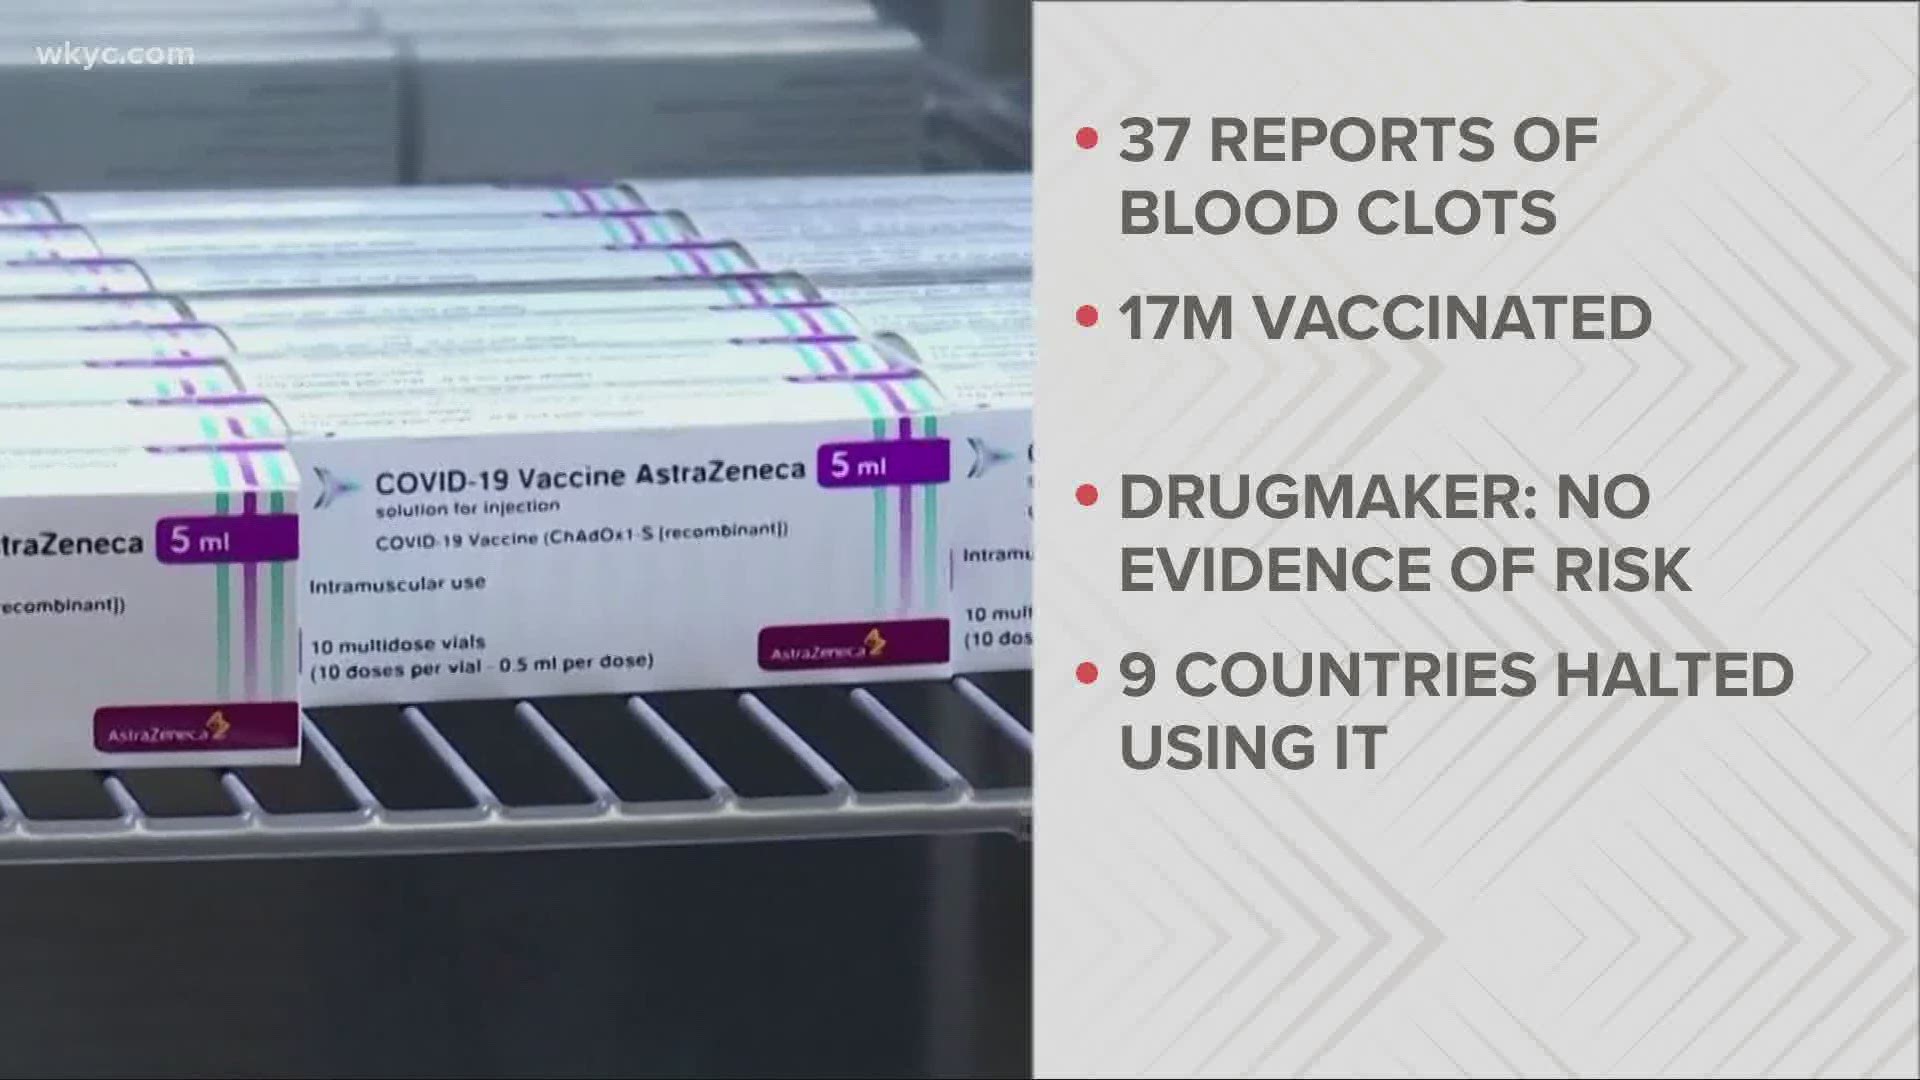 The vaccine could hit the U.S. market next month.  The company is expected to present safety data to the FDA soon.  Monica Robins tell us why & what we need to know.